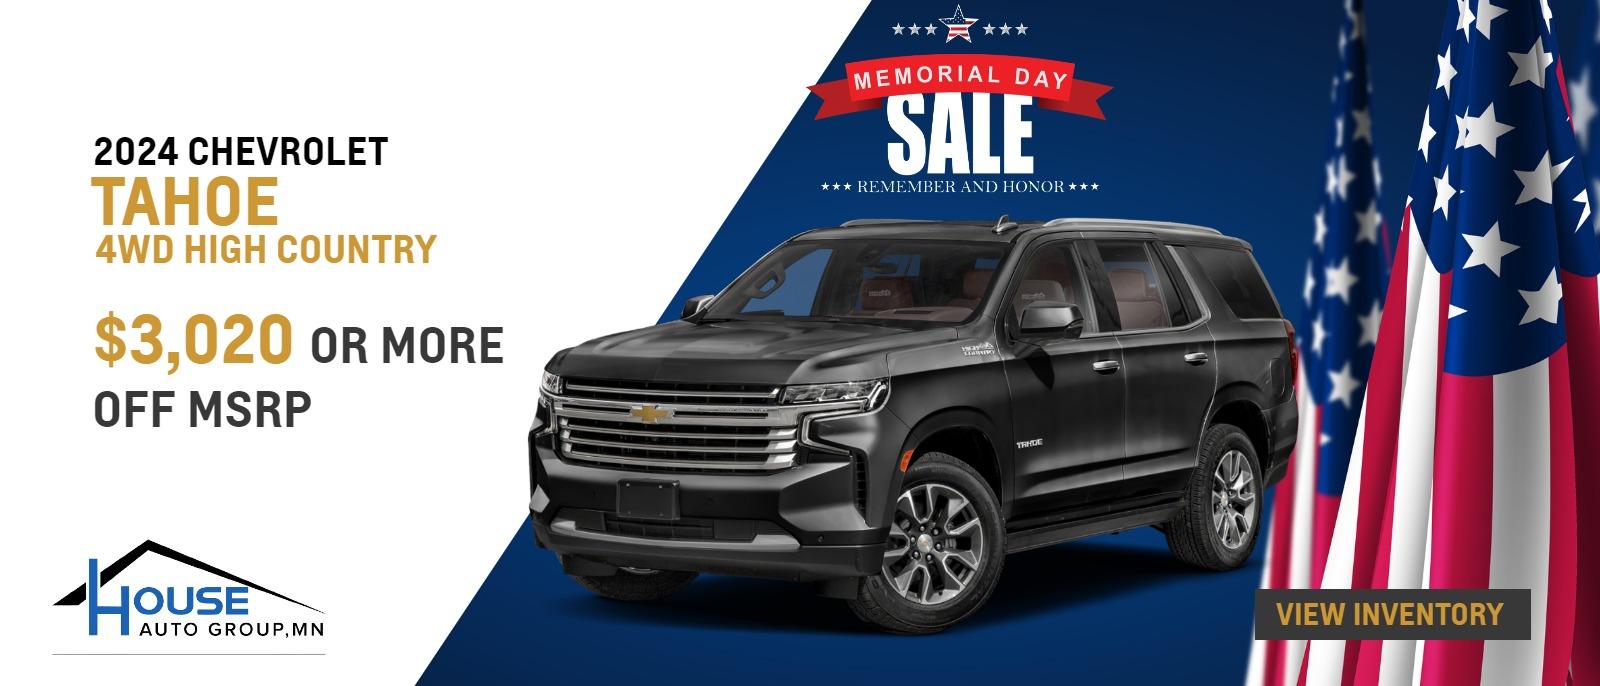 2024 Tahoe 4WD High Country SUVs - $3,020 Or More Off MSRP!